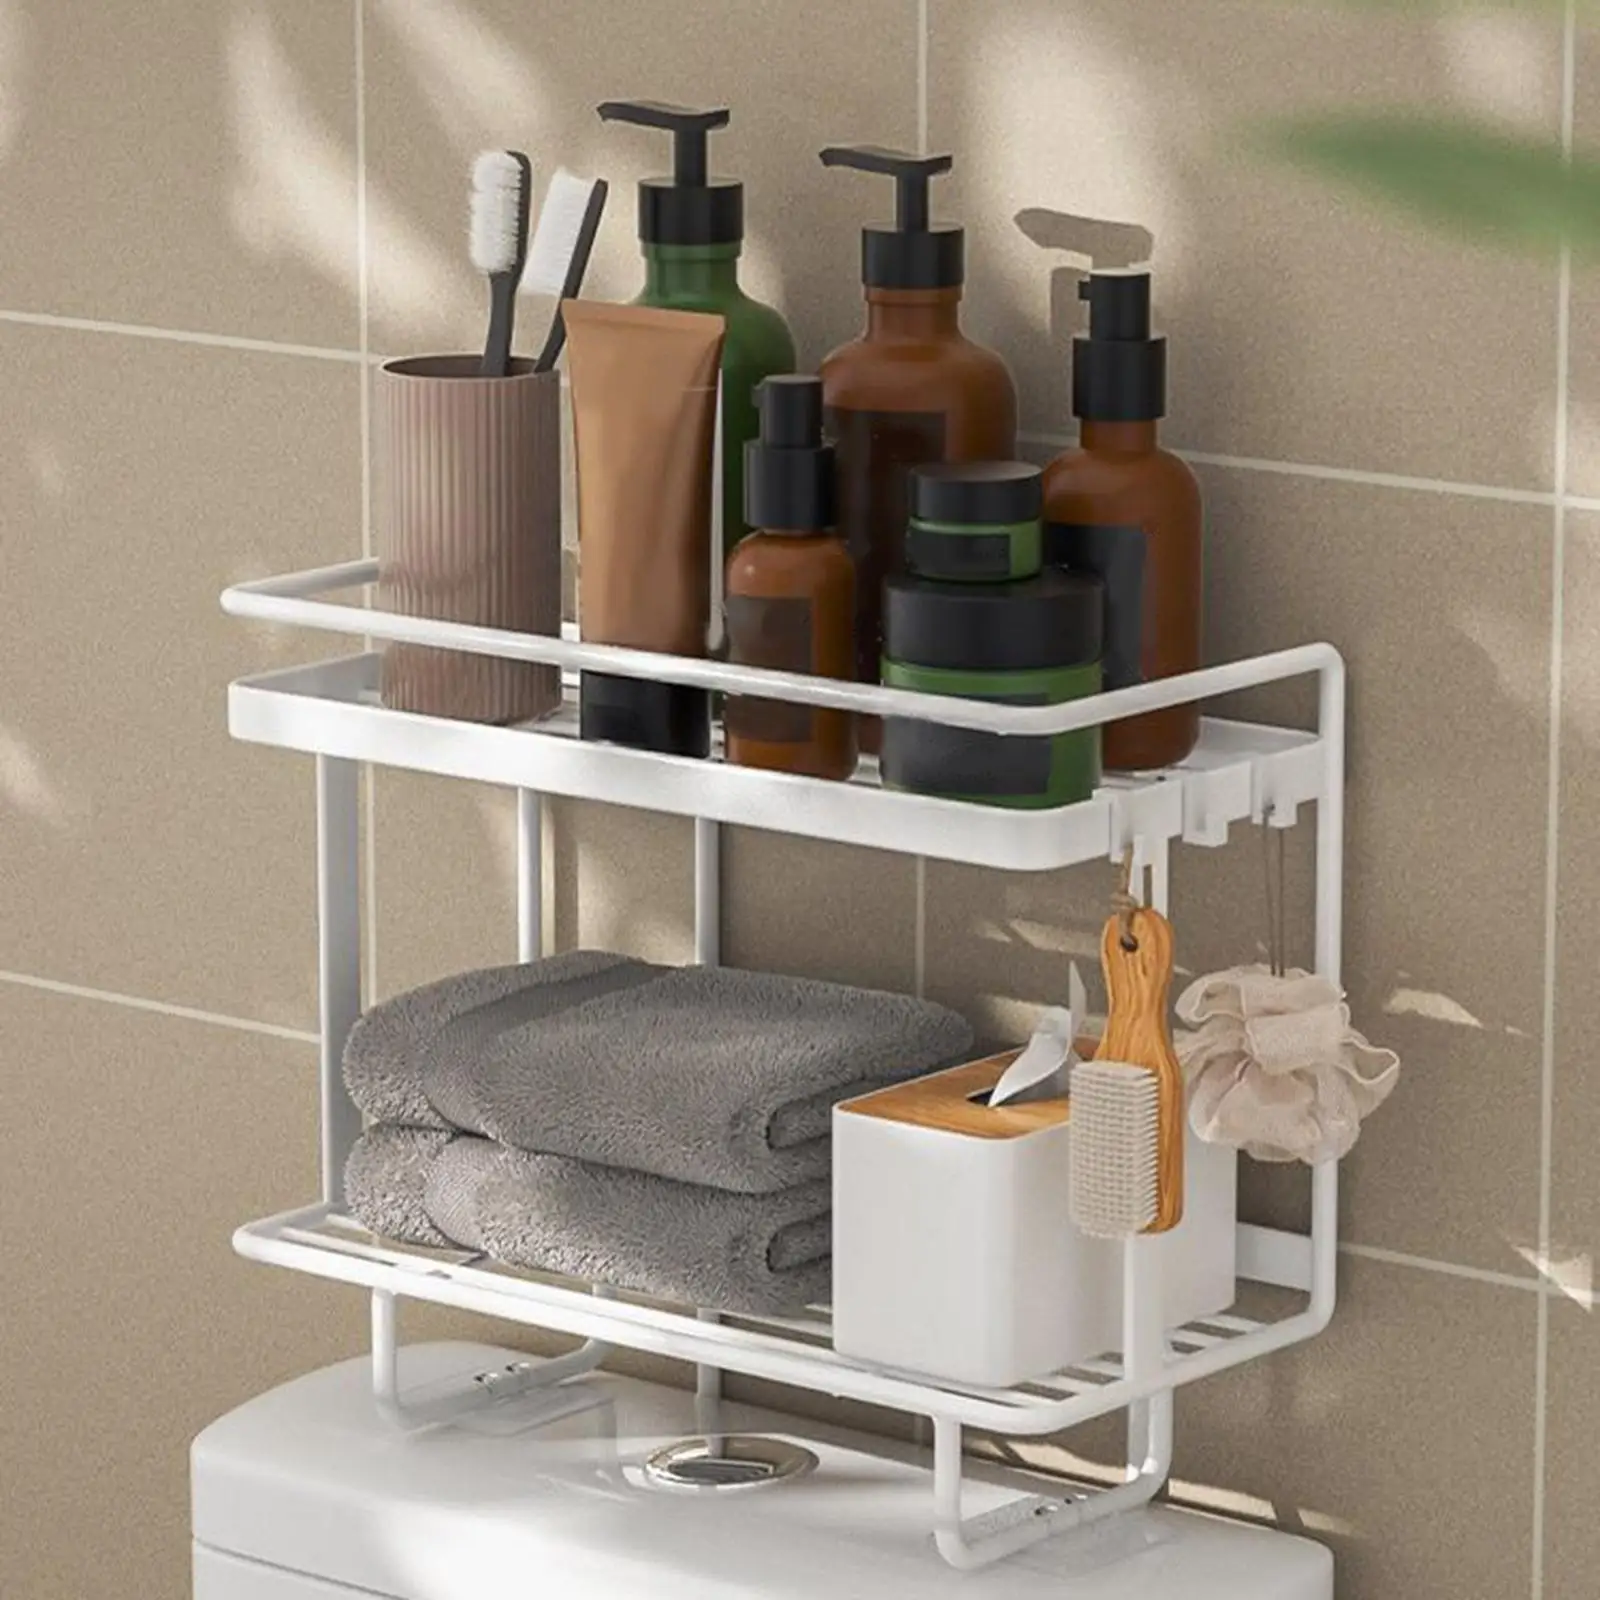 Bathroom Over The Toilet Storage Shelf and 2 Adhesive Drilling